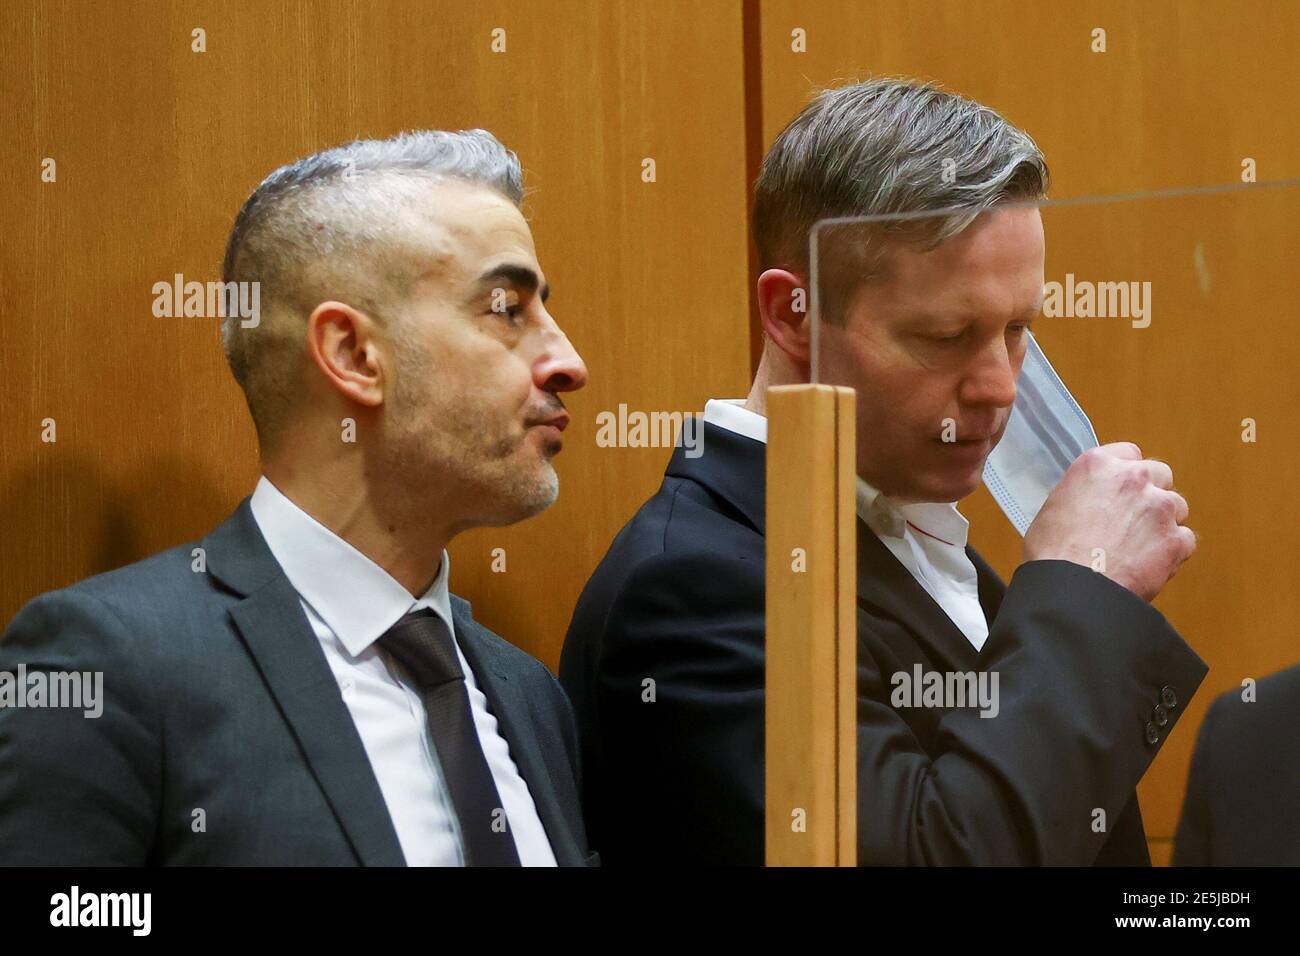 Frankfurt, Germany. 28th Jan 2021. 28 January 2021, Frankfurt/Main: Stephan Ernst (r), main defendant in the trial of the murder of Kassel's district president Lübcke, stands in the courtroom next to his lawyer Mustafa Kaplan and takes off his mouth-nose protection. The verdicts in the trial were announced on this day of the hearing. Photo: Kai Pfaffenbach/Reuters/Pool/dpa Stock Photo